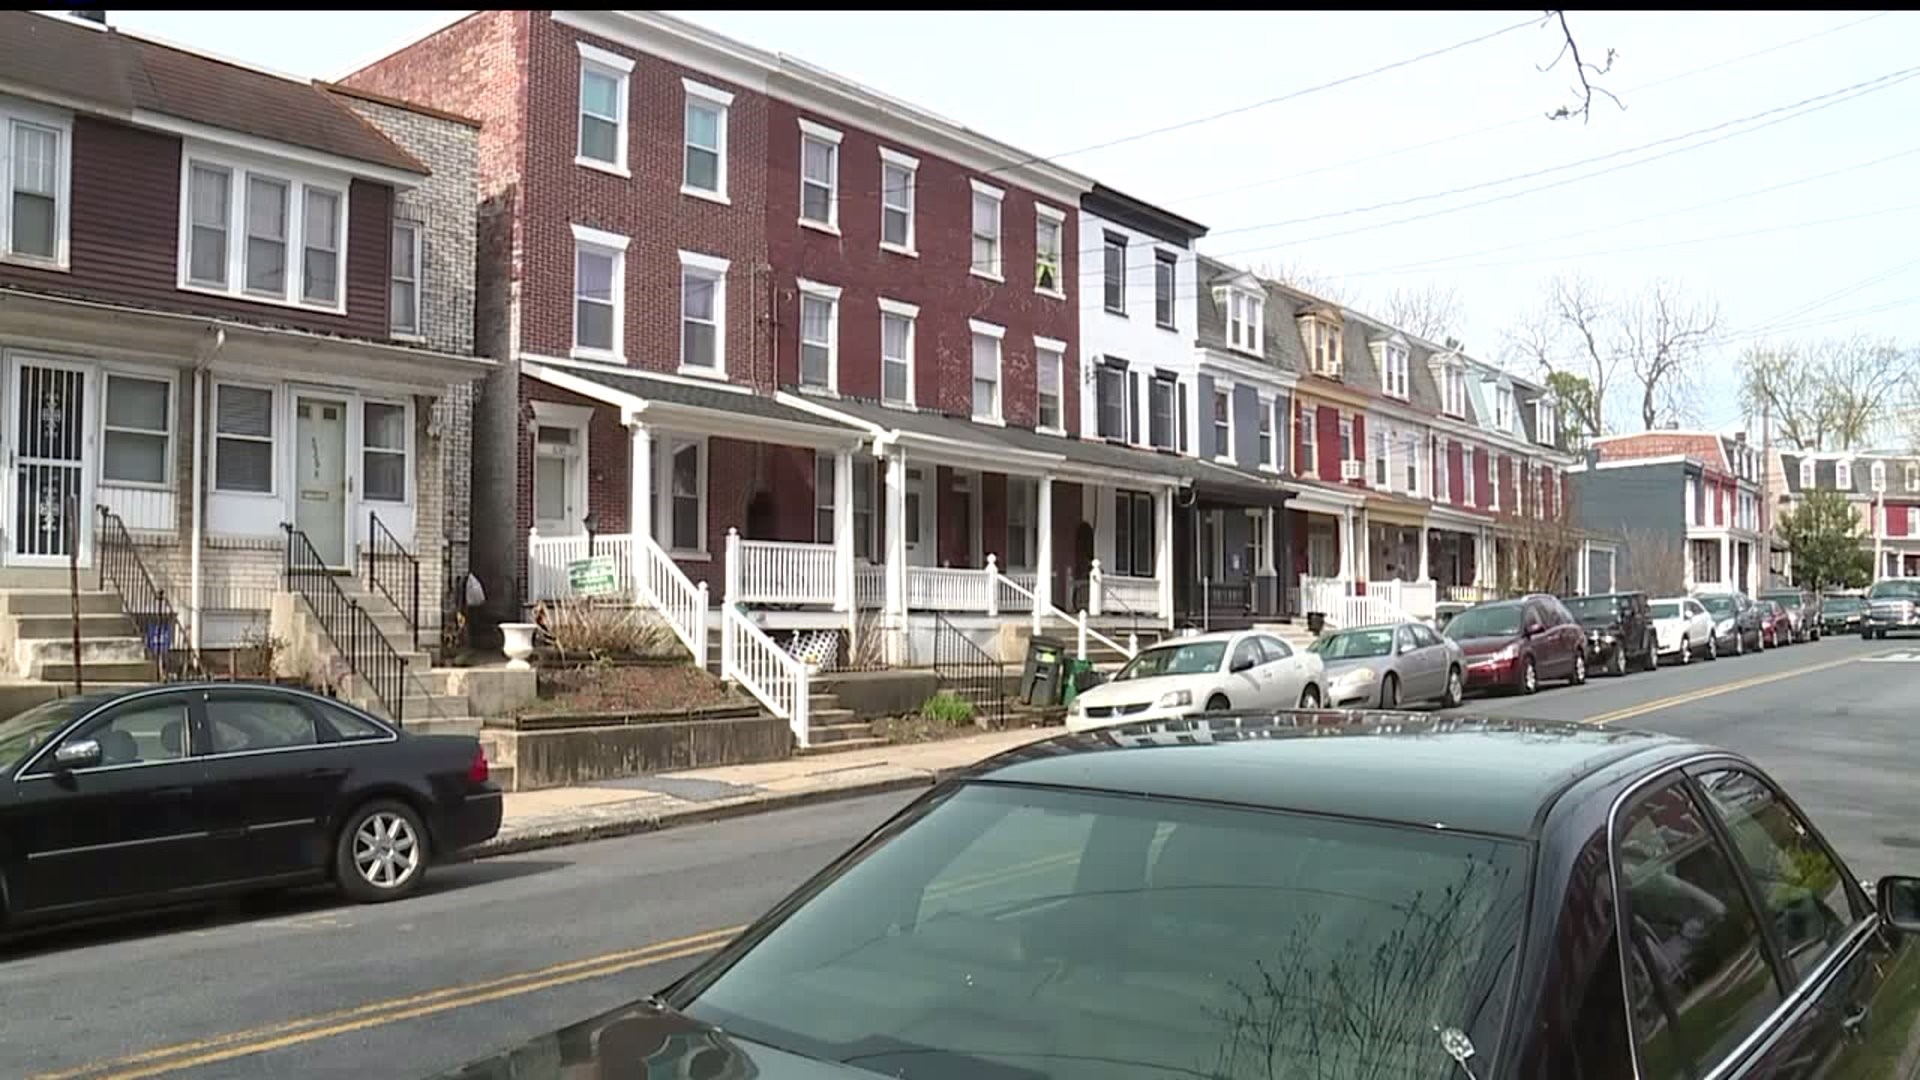 Neighbors report having trouble finding affordable, quality housing in Lancaster County